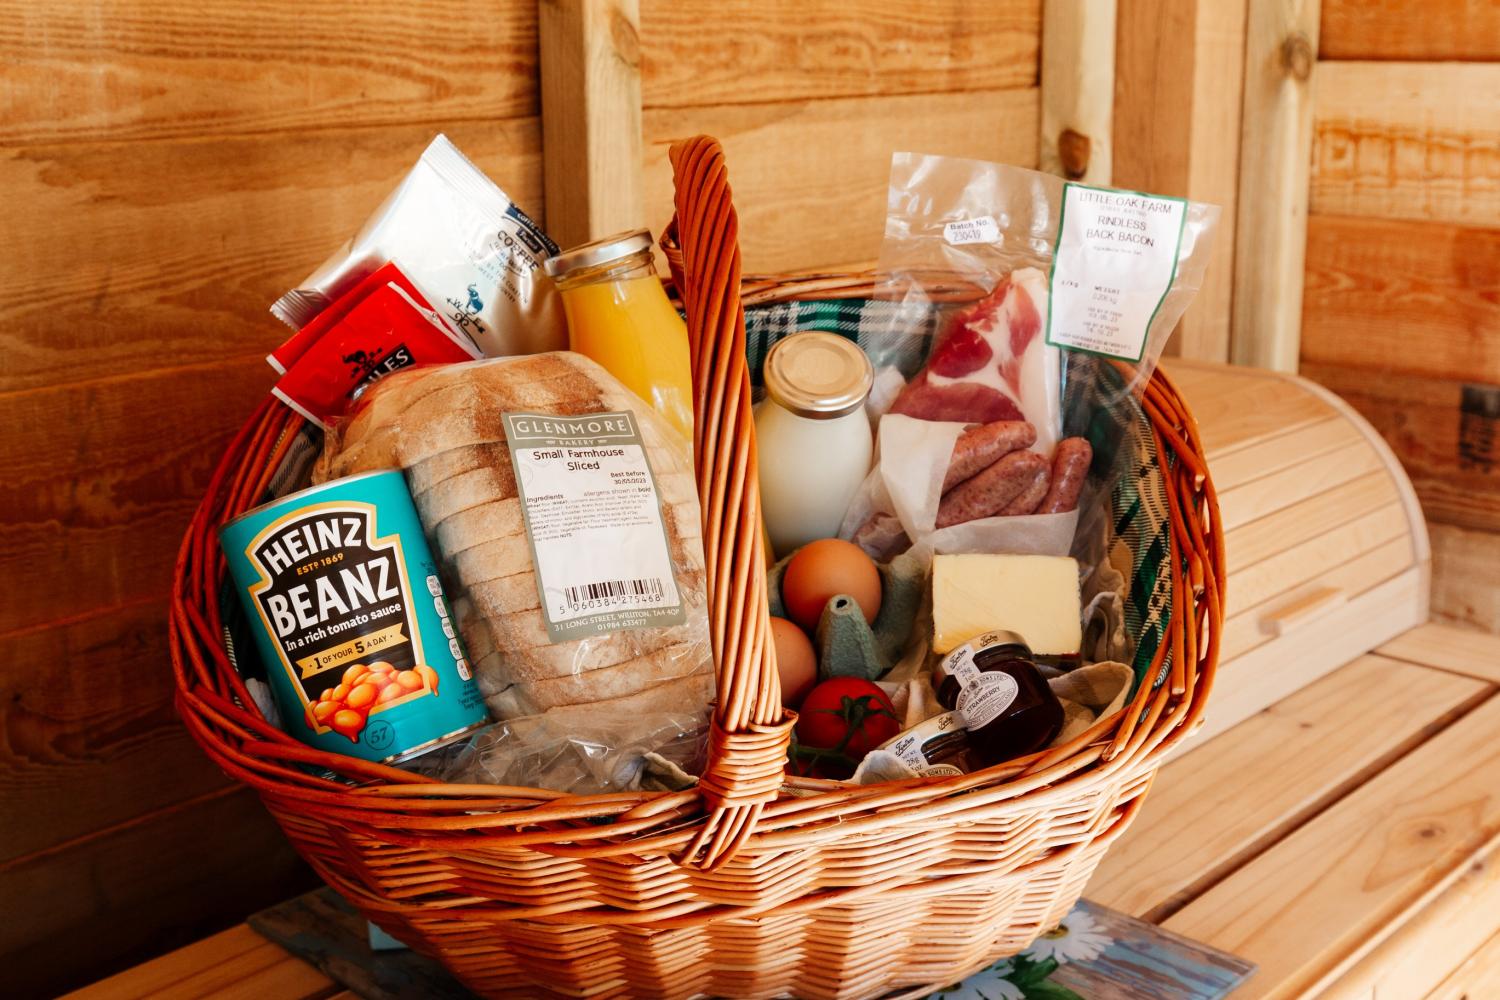 Breakfast Hamper available for extra charge